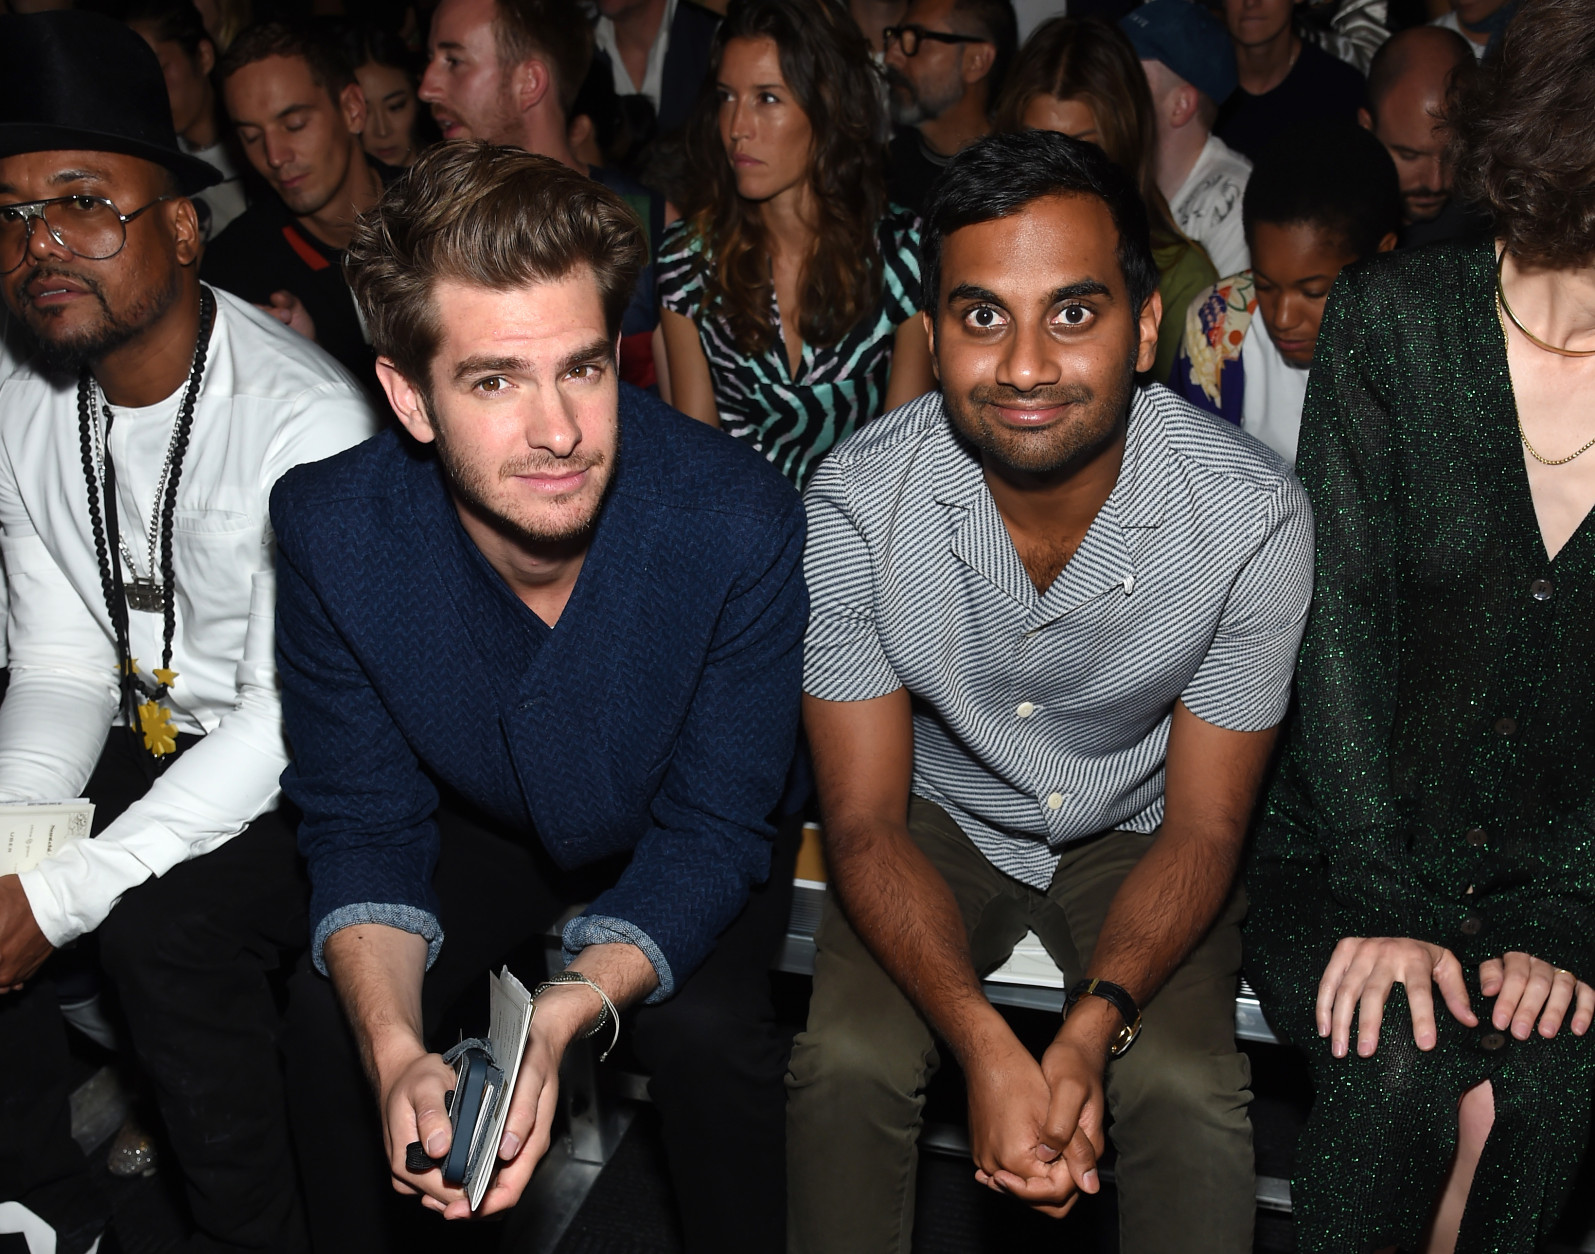 NEW YORK, NY - SEPTEMBER 11:  Actors Andrew Garfield and Aziz Ansari attend the Opening Ceremony fashion show Front Row during New York Fashion Week at Jacob Javits Center on September 11, 2016 in New York City.  (Photo by Jamie McCarthy/Getty Images)